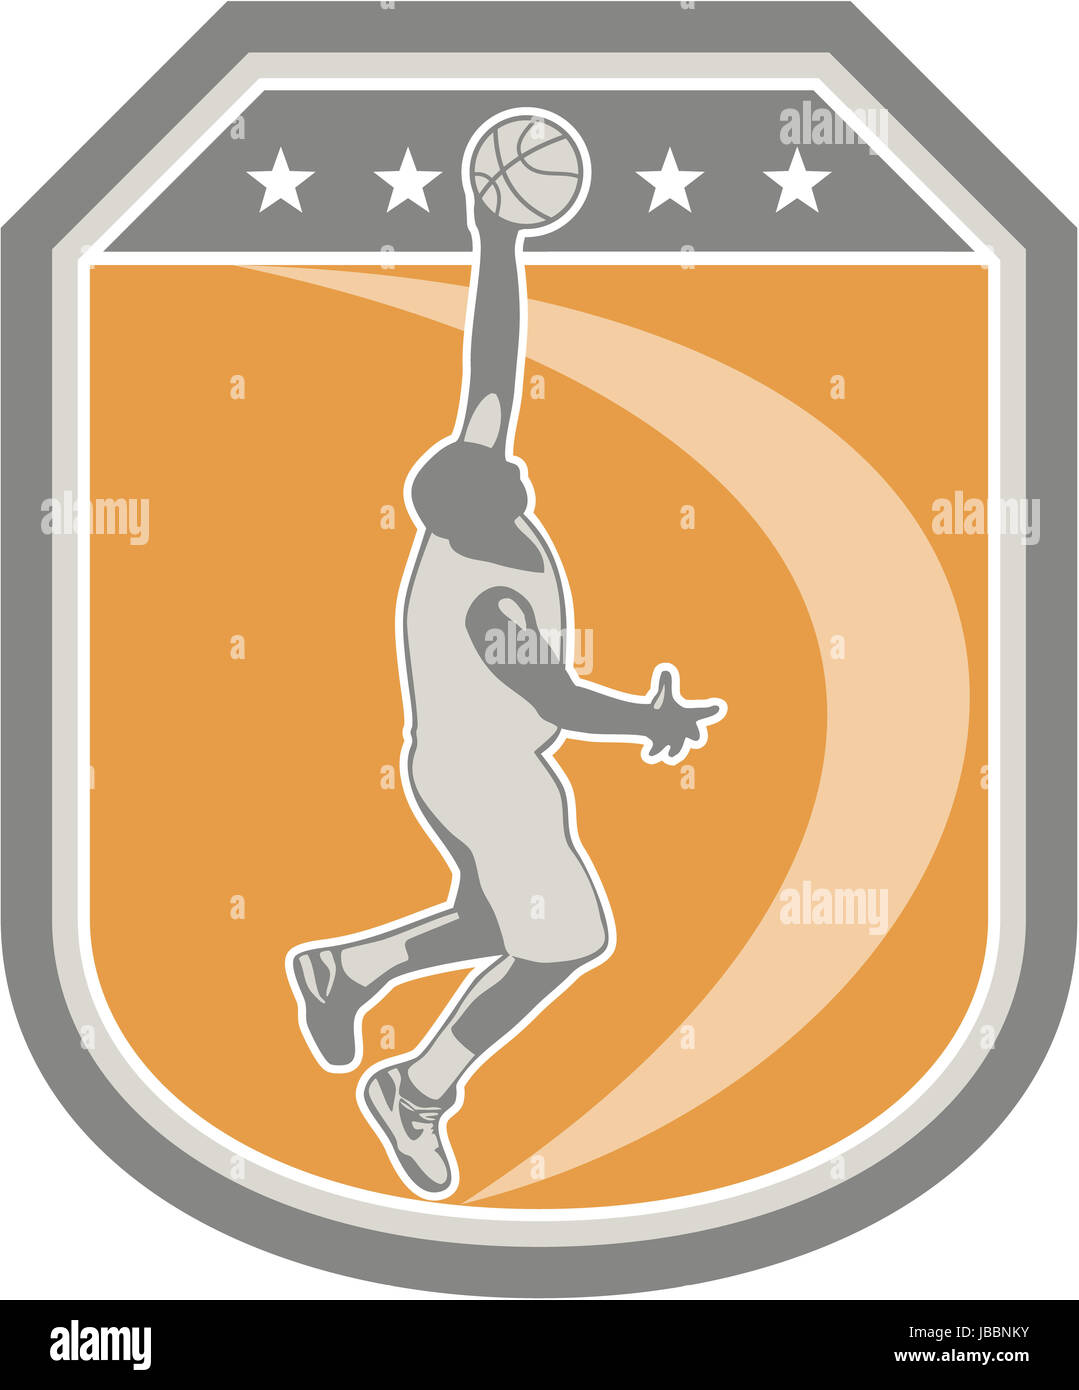 Illustration of a basketball player dunking rebounding ball set inside shield crest with stars done in retro style on isolated background. Stock Photo